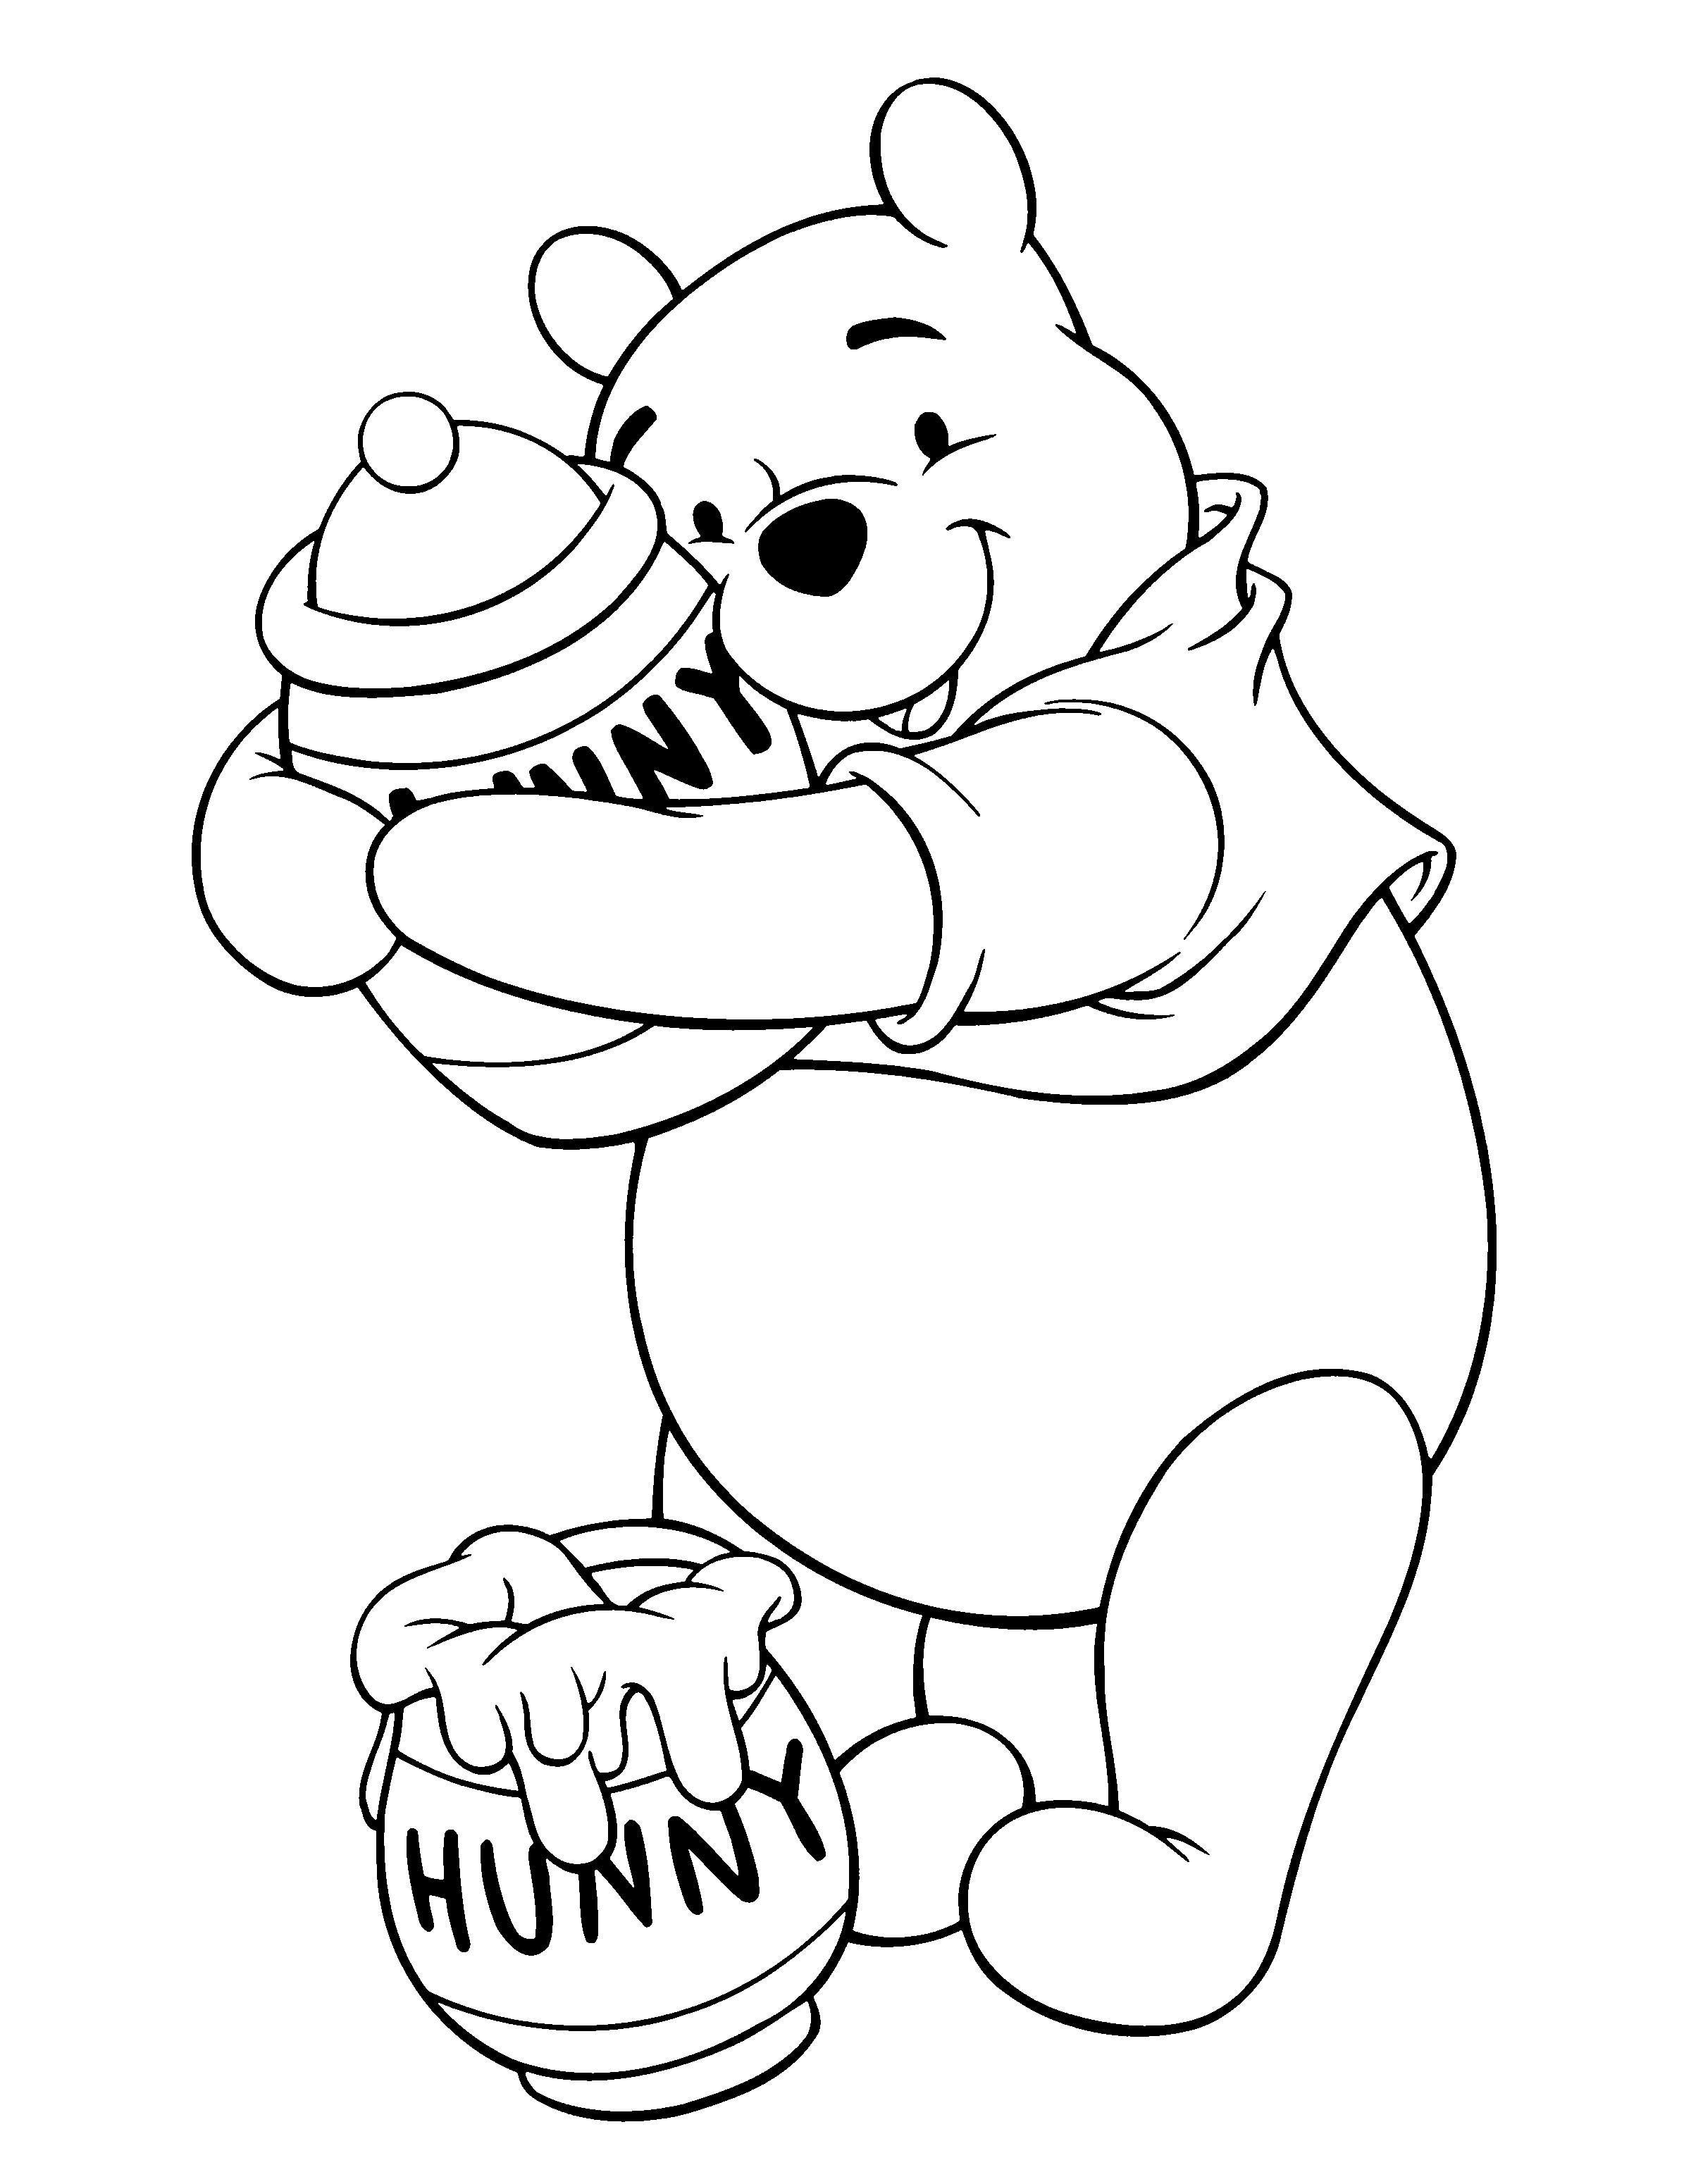 animated-coloring-pages-winnie-the-pooh-image-0023